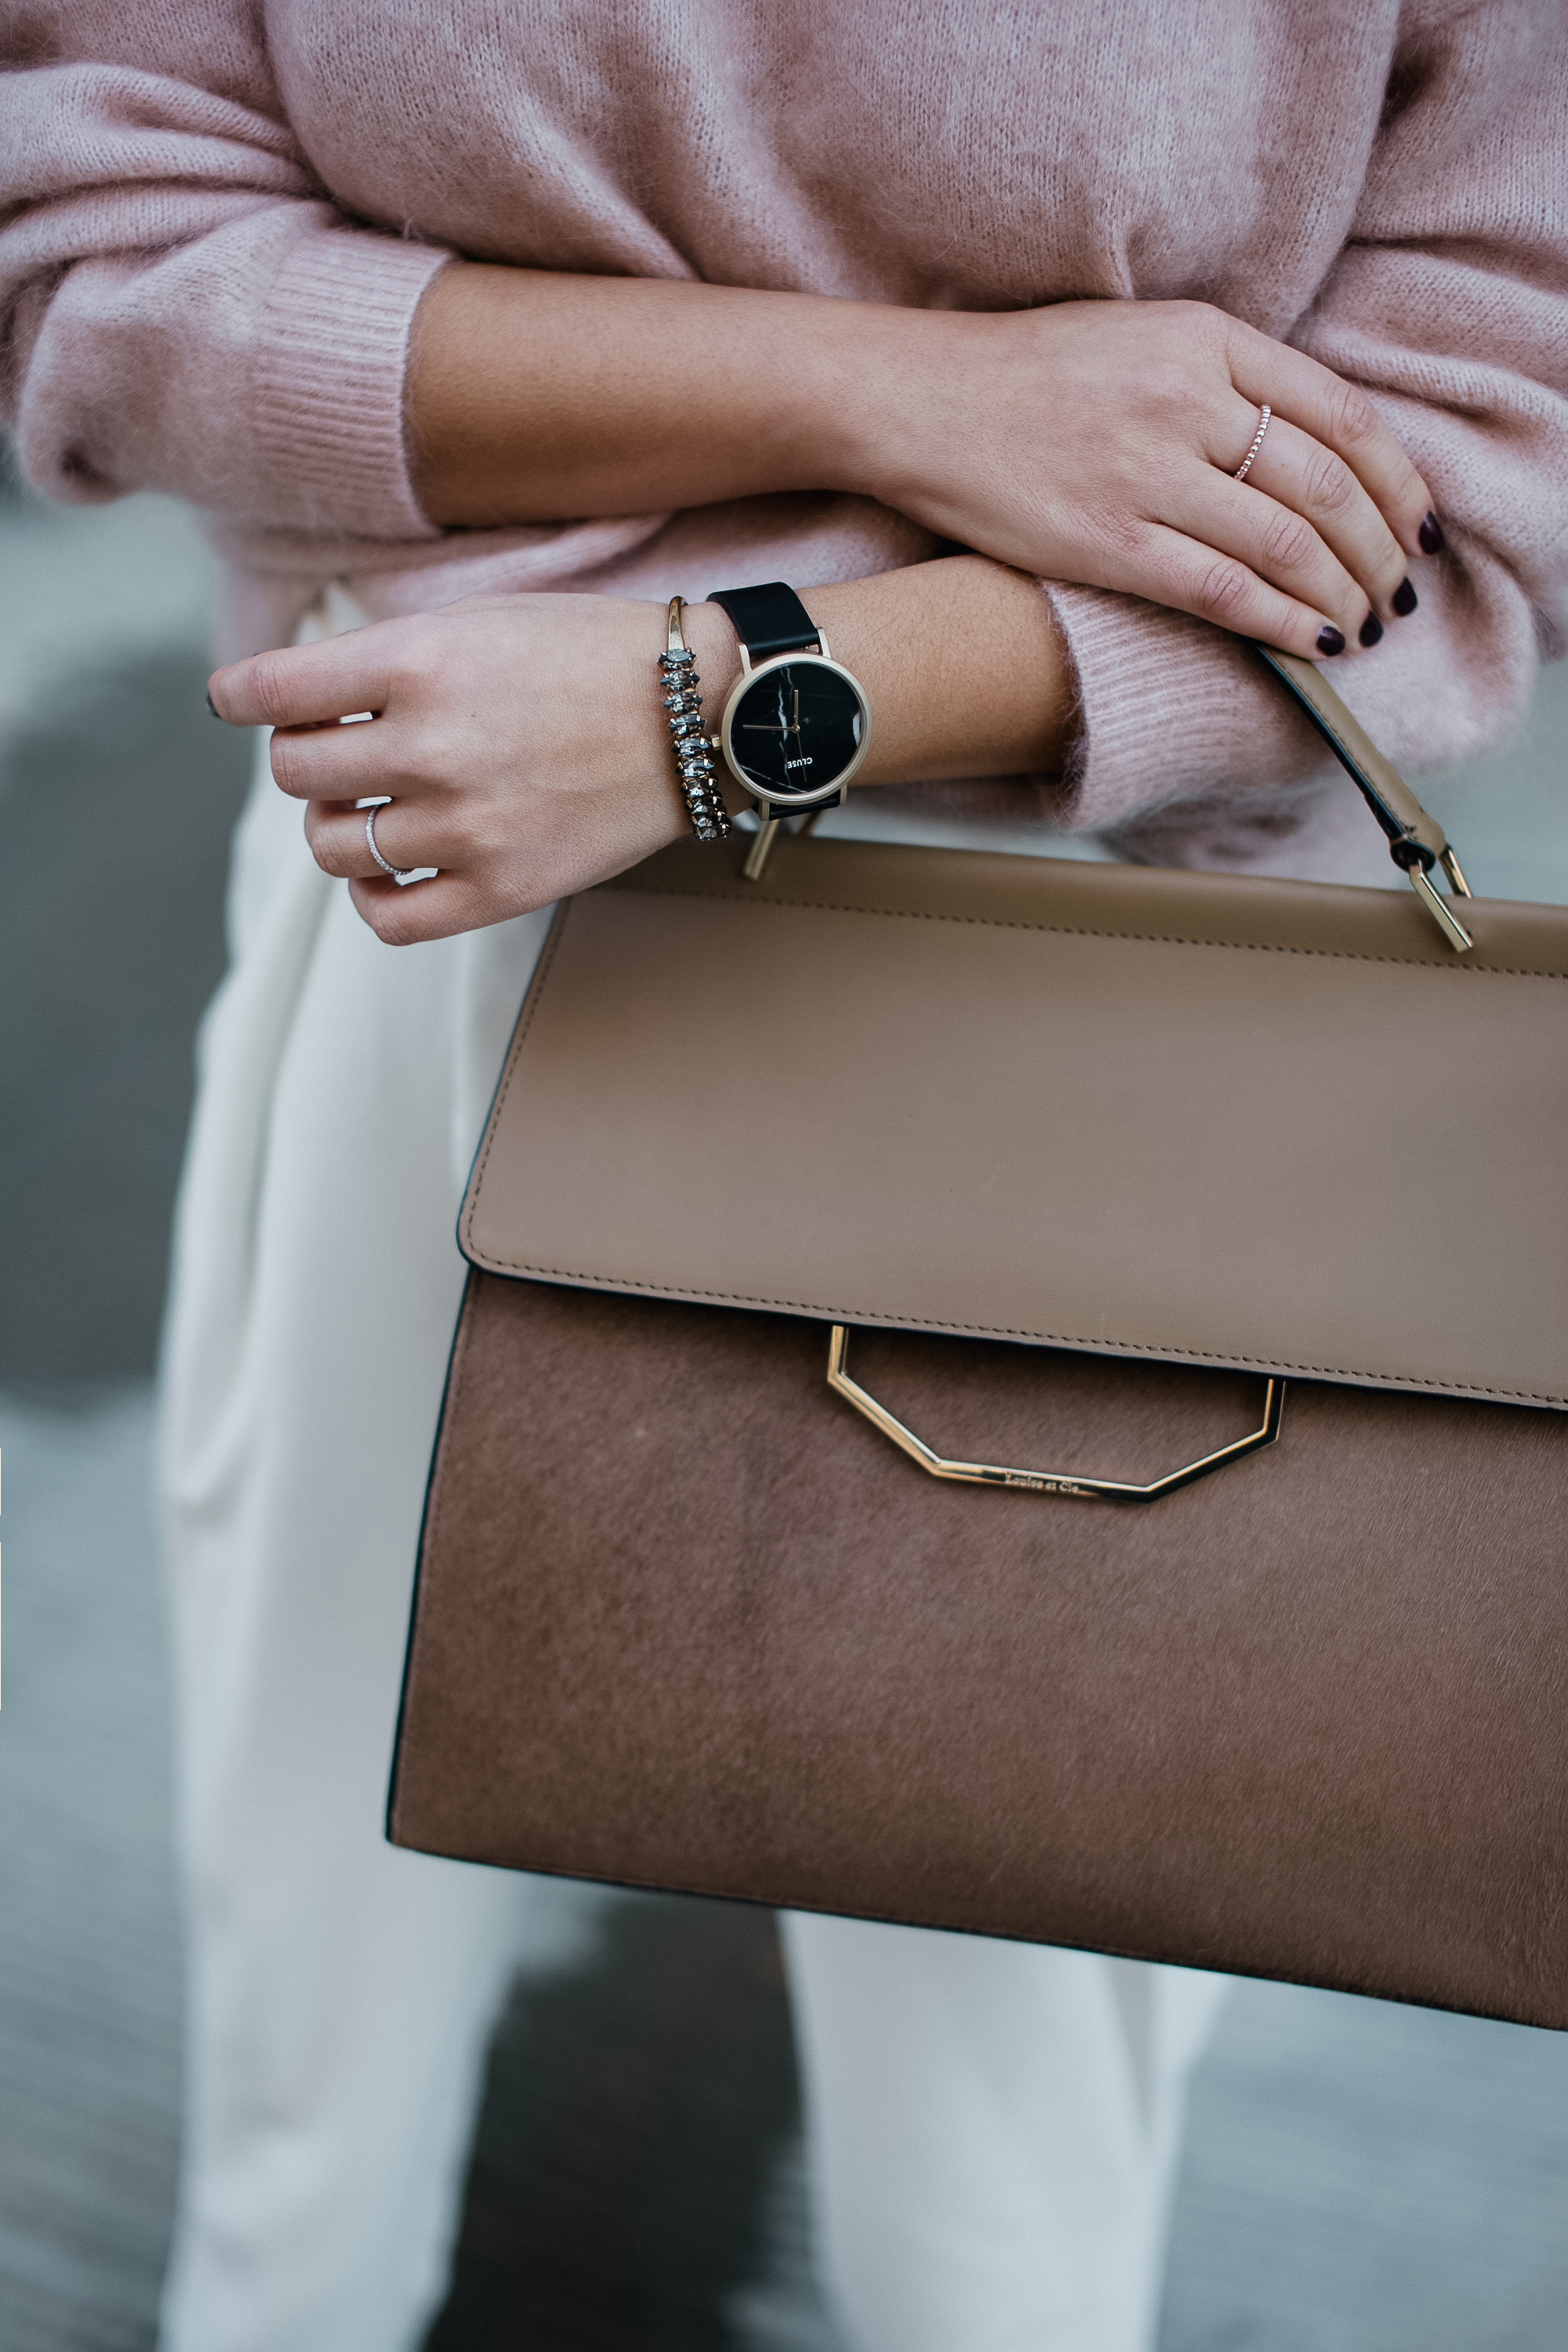 Style MBA wears Louise et Cie Towa Satchel and Cluse Watch